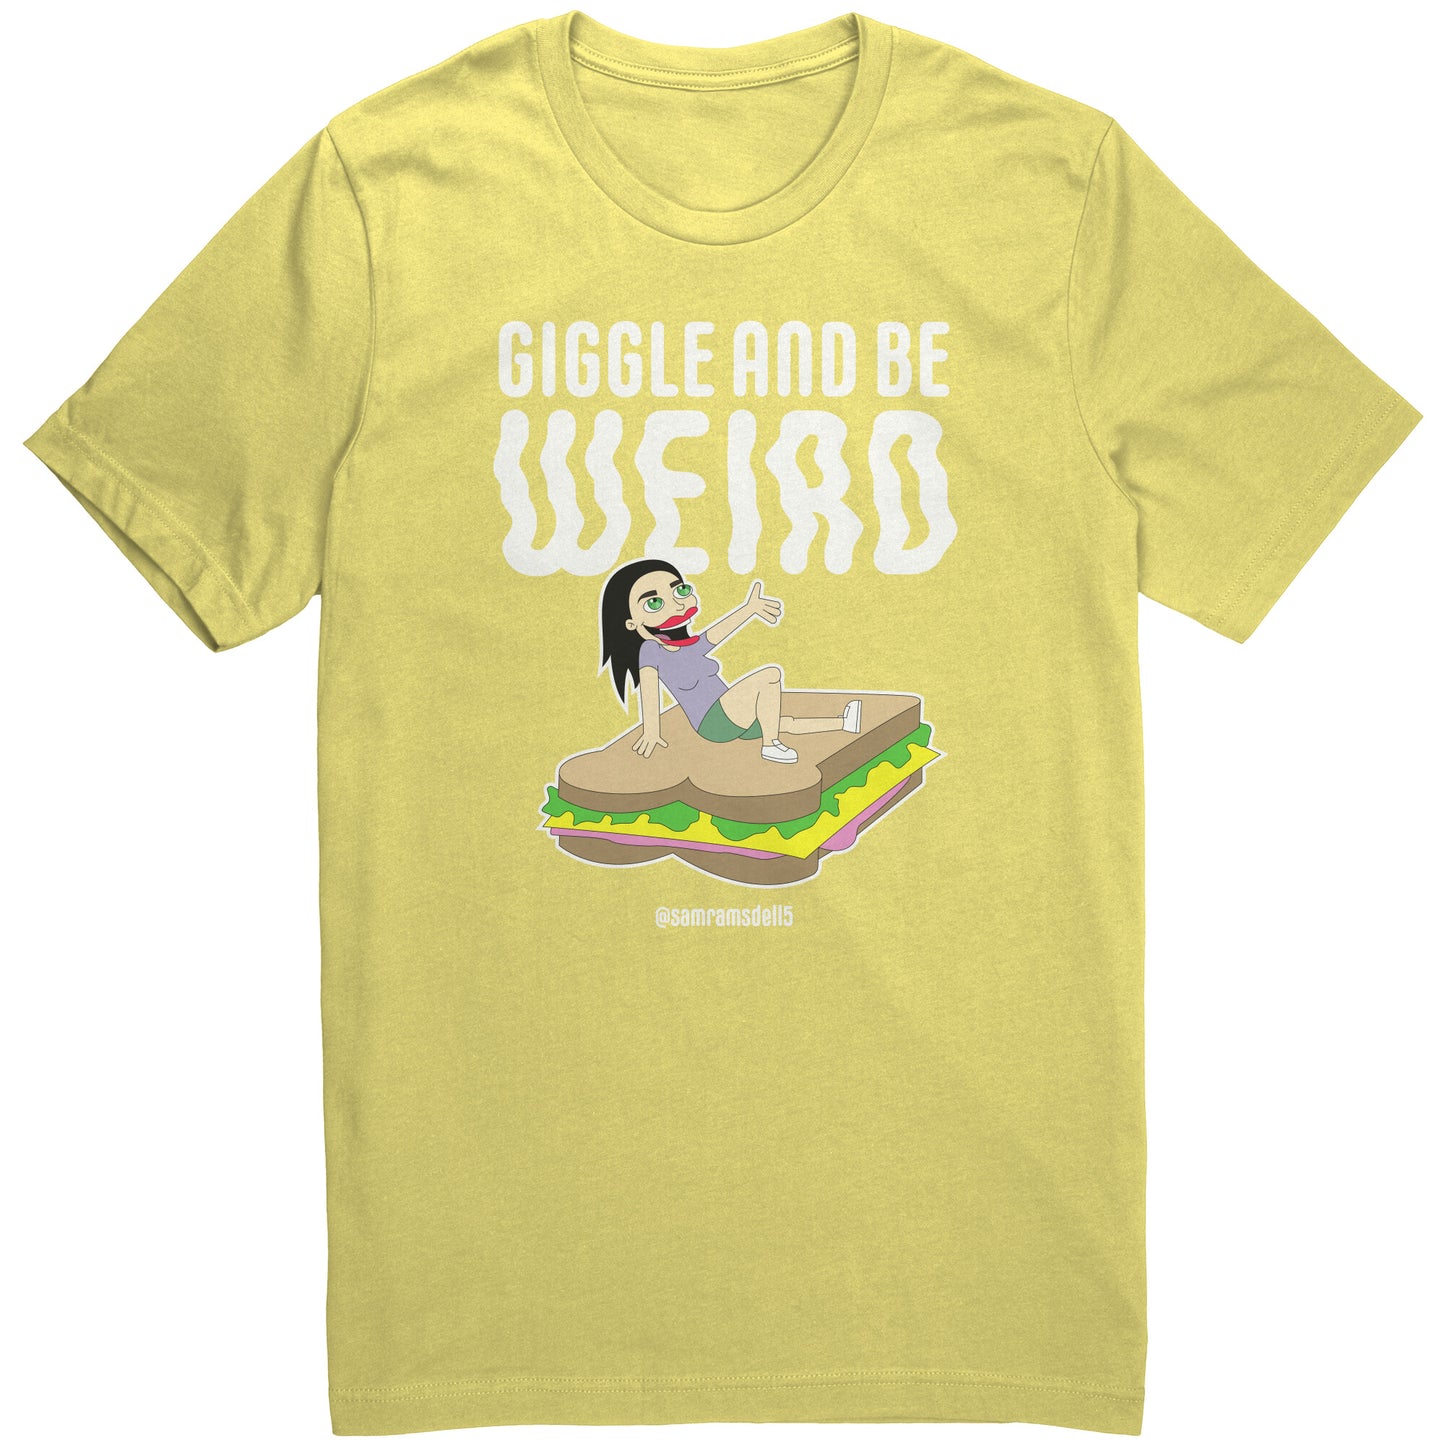 Giggle and be Weird - T Shirt